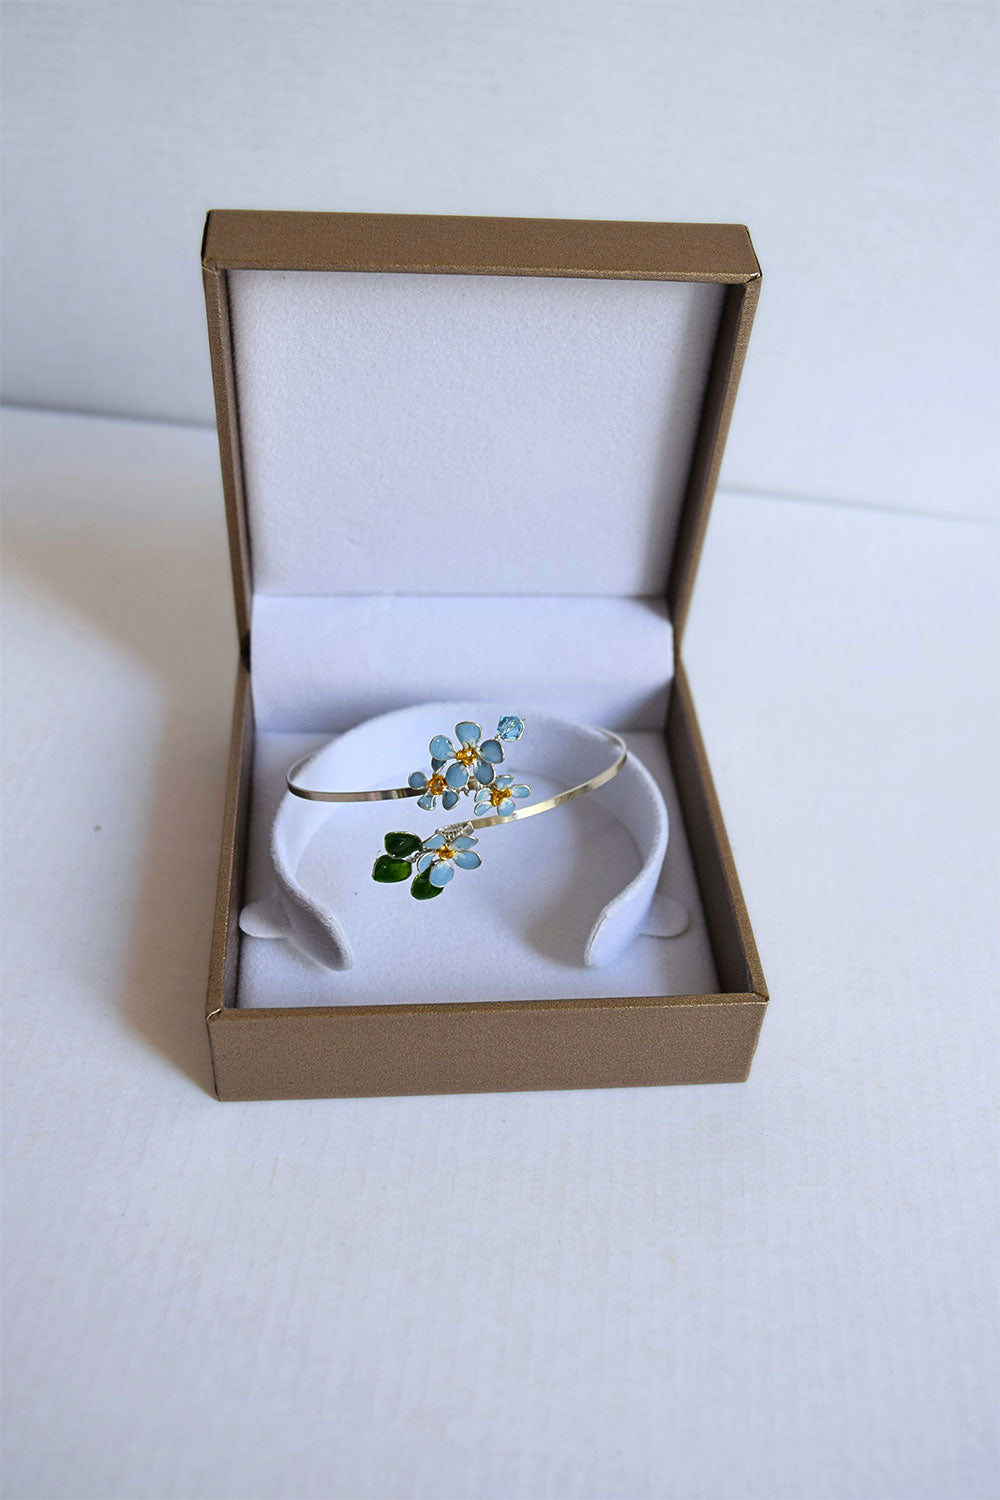 Openable Sterling silver bangle with bunch of Forget-Me-Not sky blue flowers, handmade 